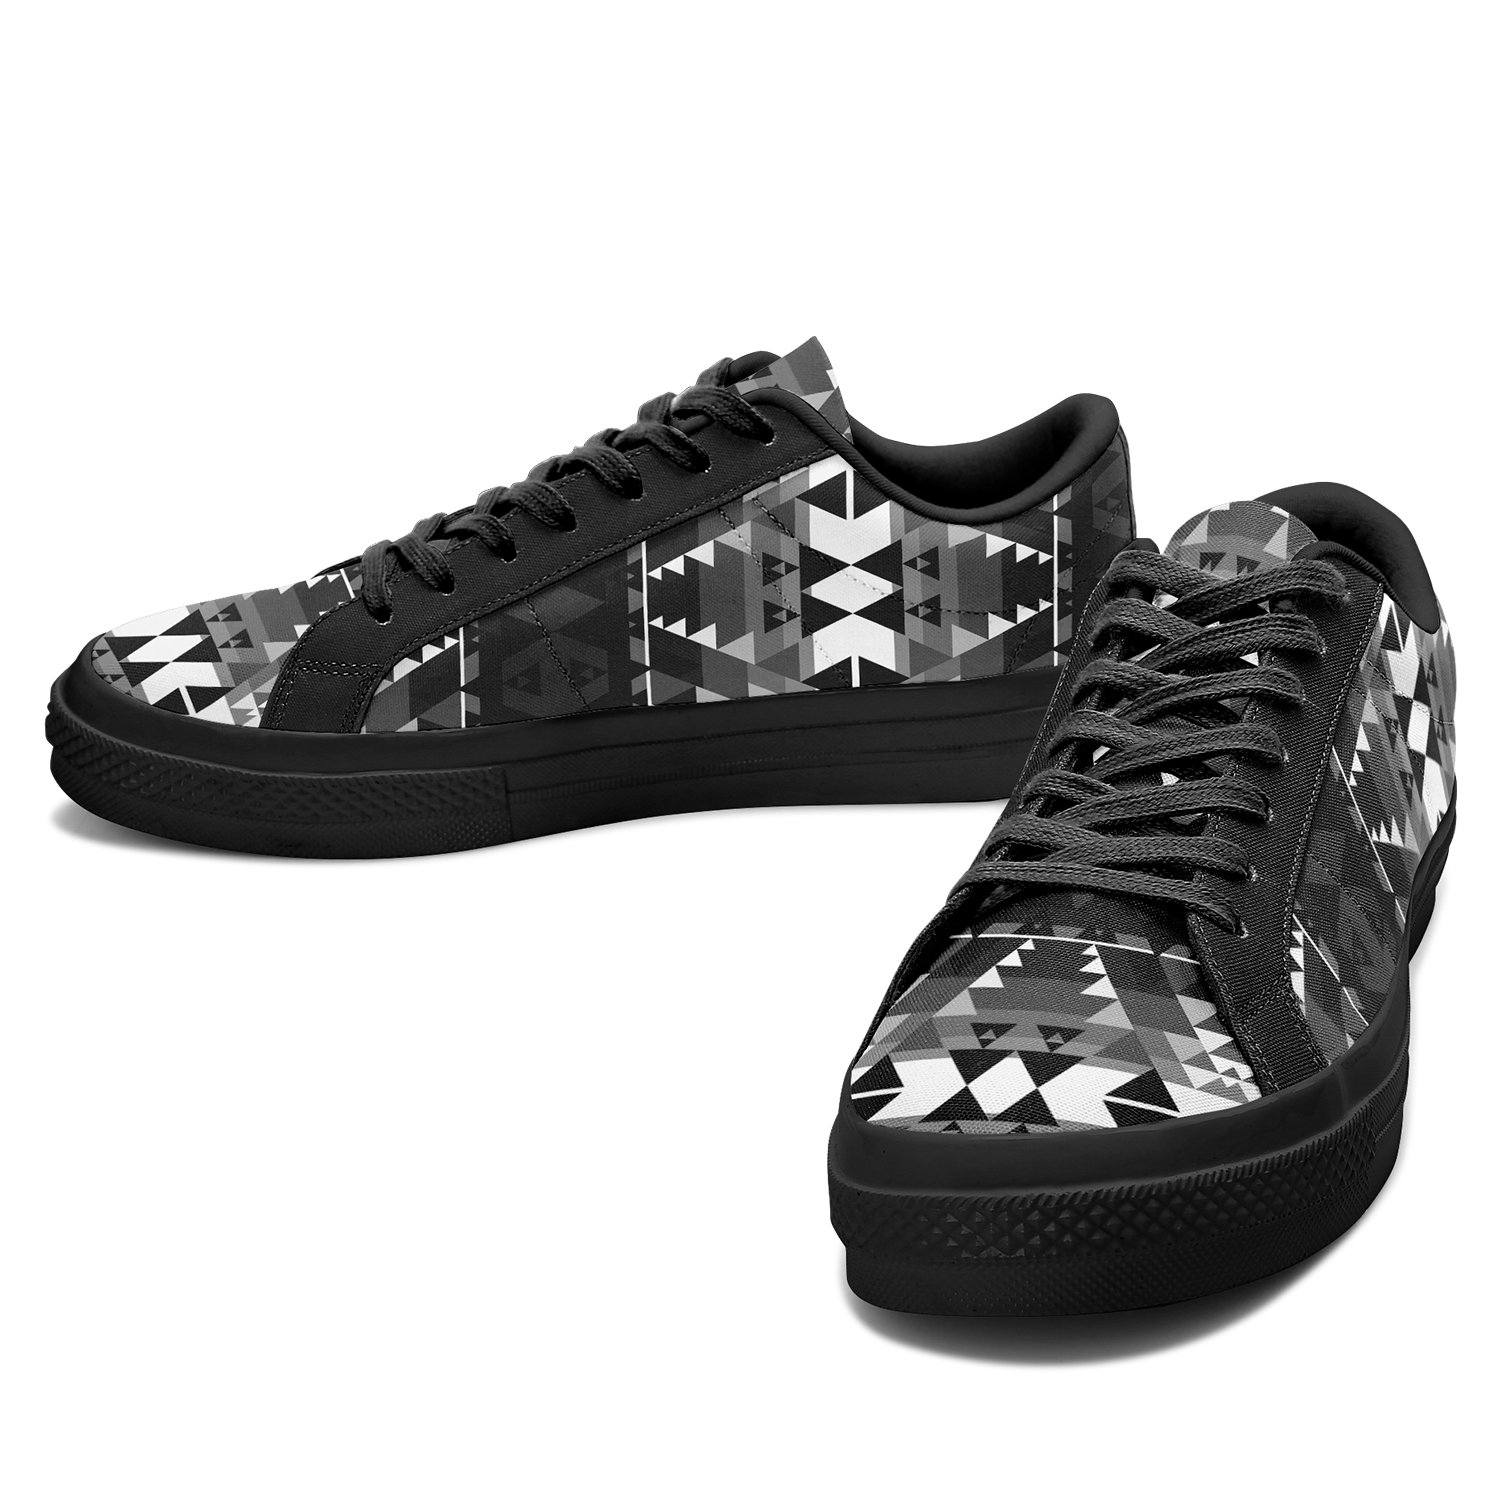 Writing on Stone Black and White Aapisi Low Top Canvas Shoes Black Sole 49 Dzine 